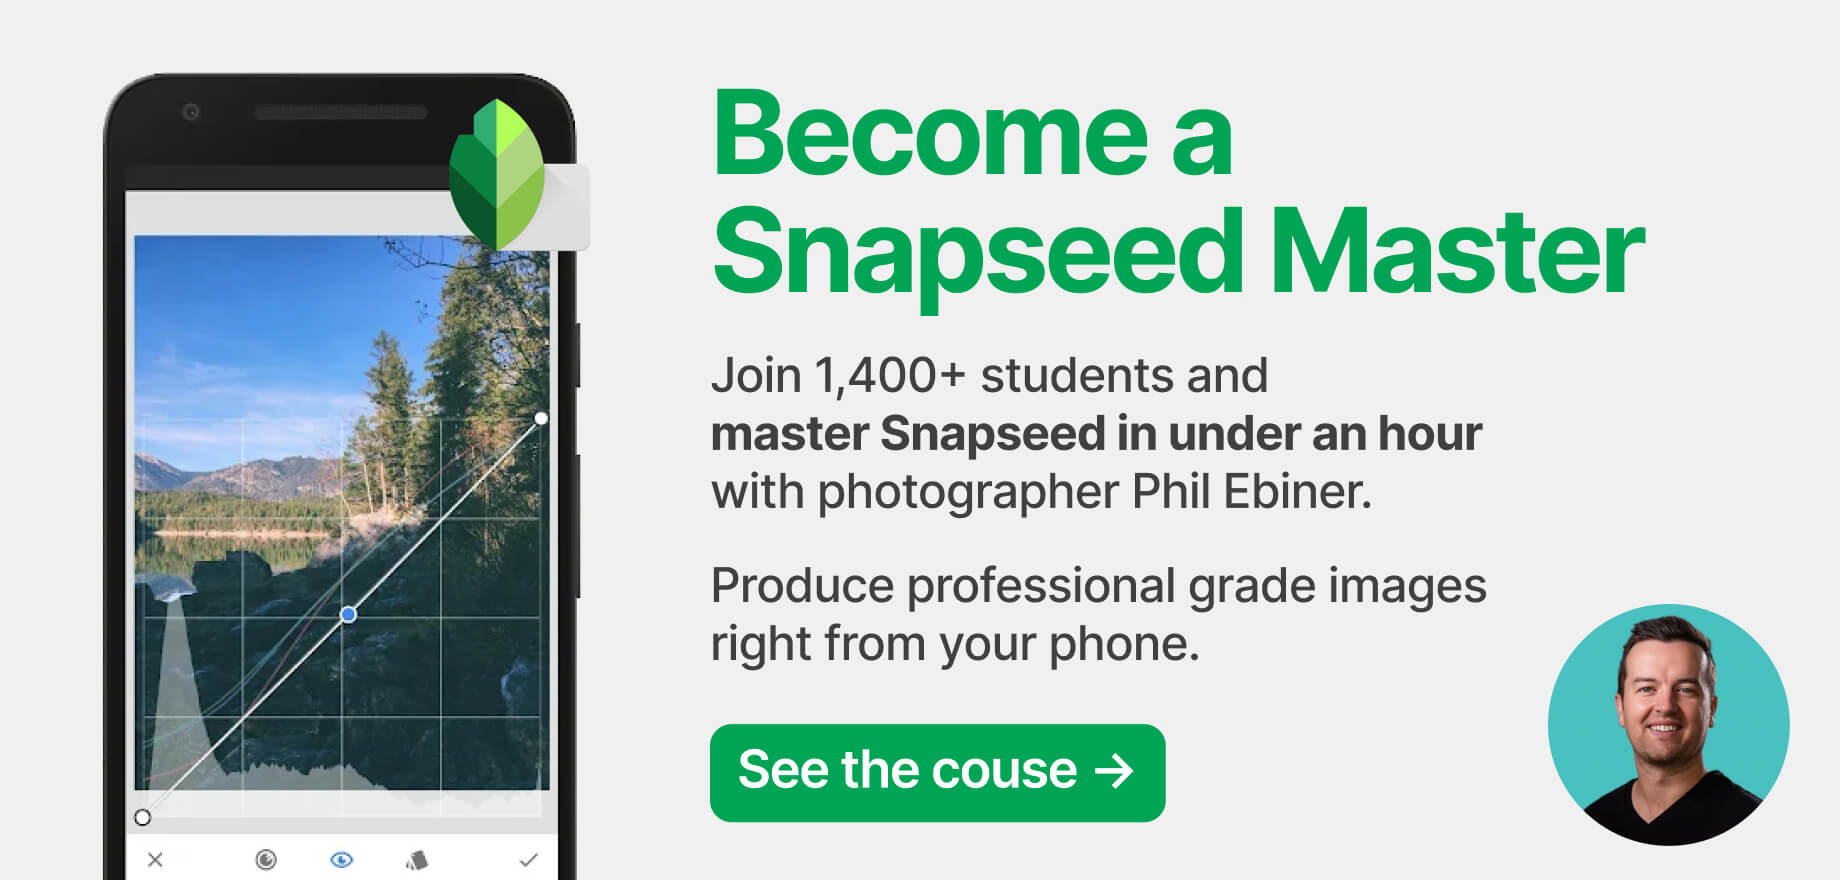 Best Snapseed Course